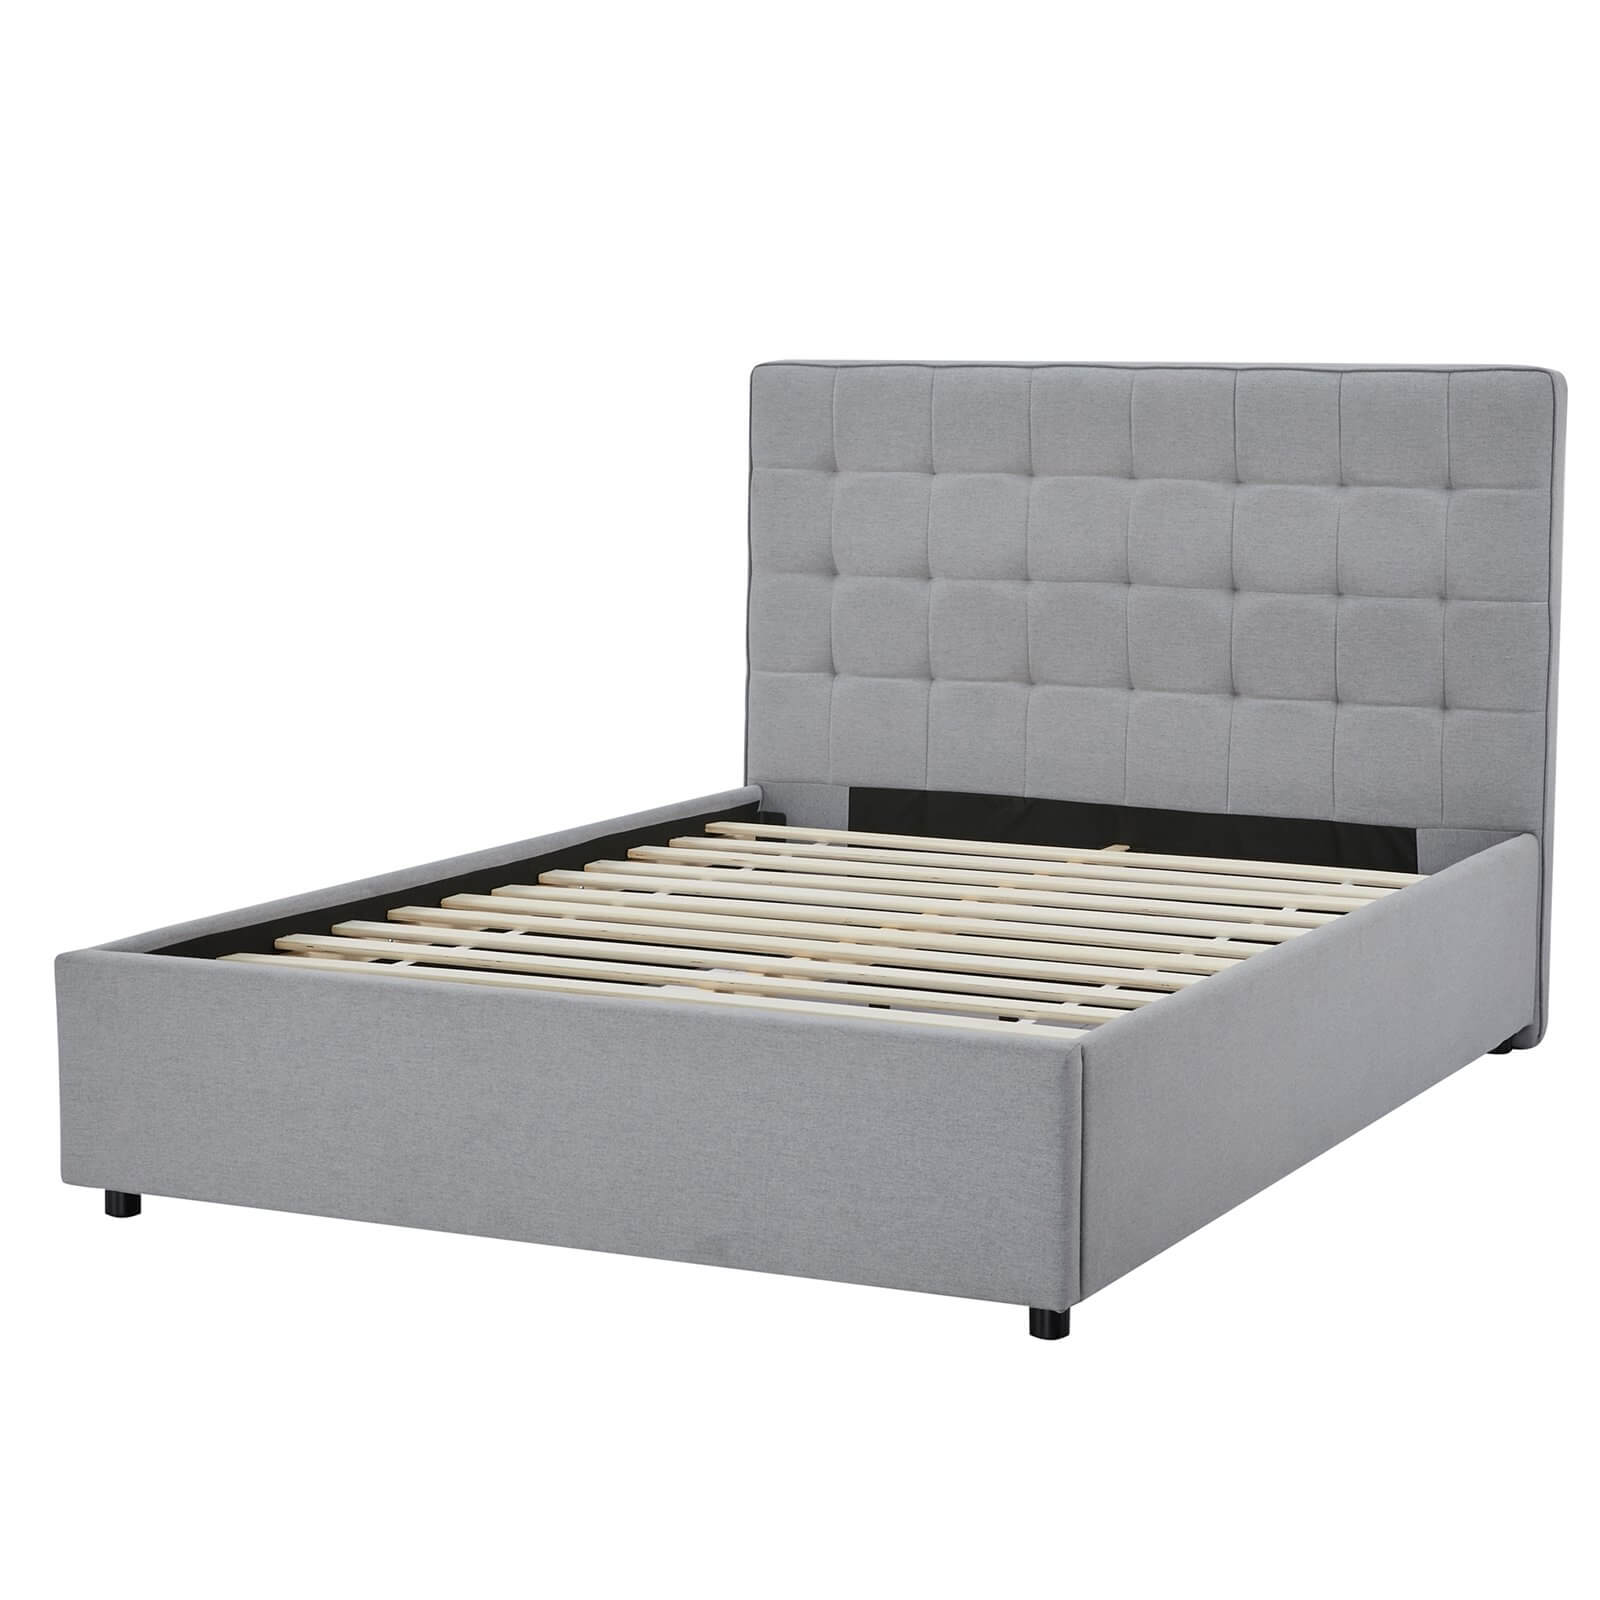 Hotel Upholstered Double Bed Frame